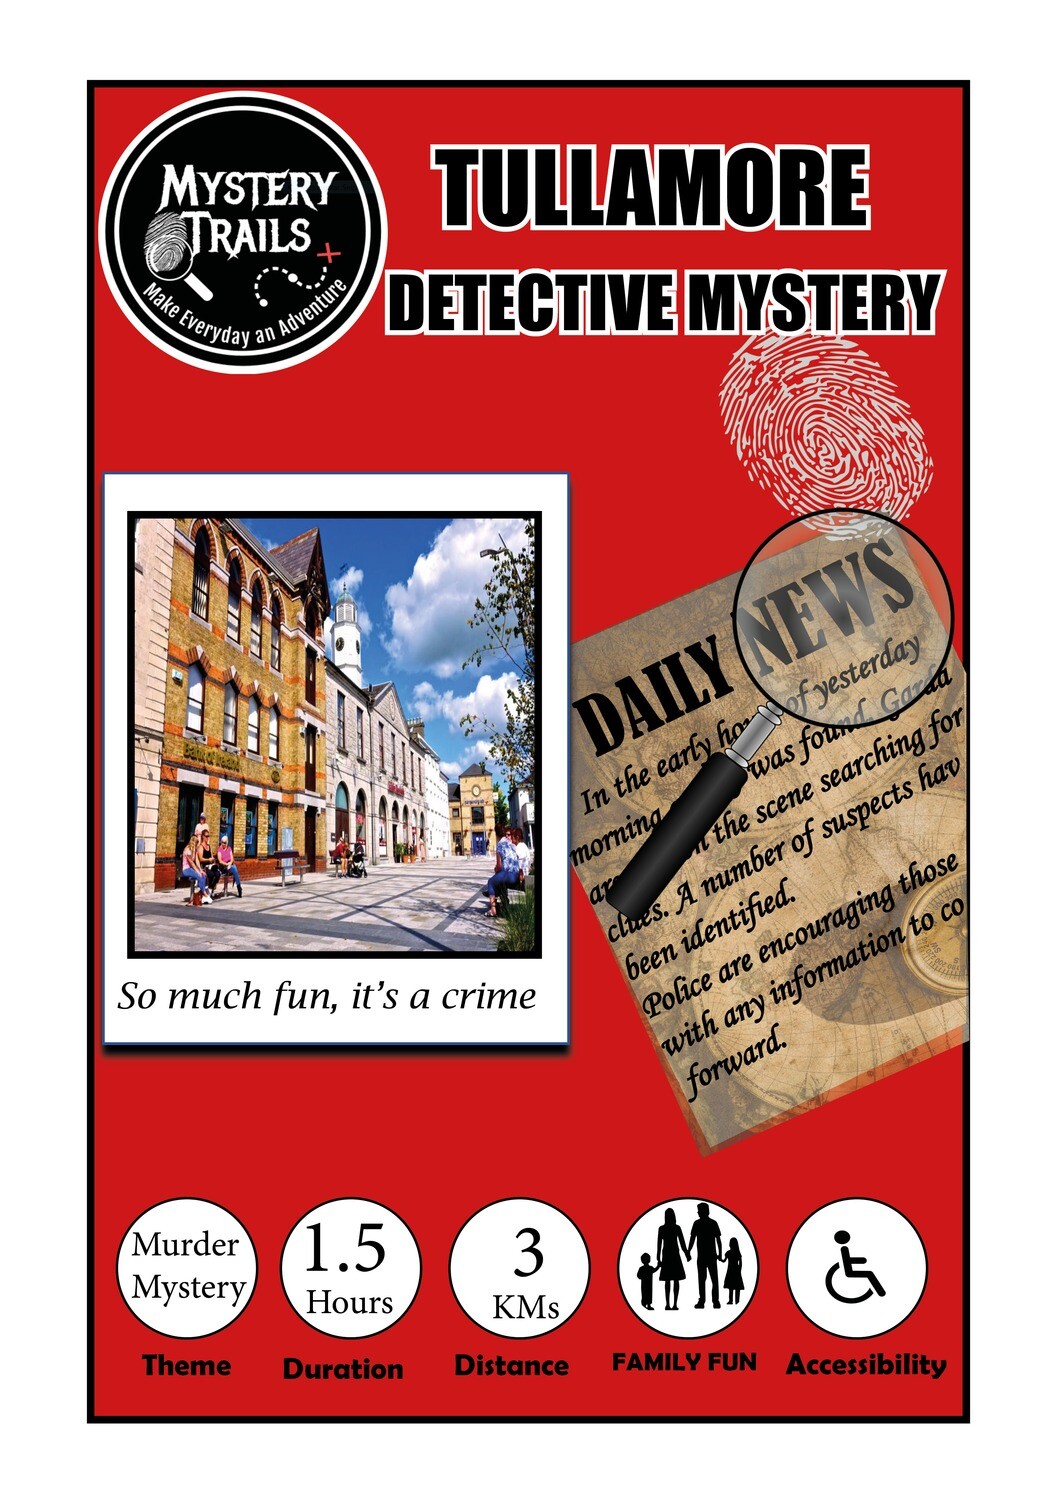 Tullamore-Detective Mystery- Offaly